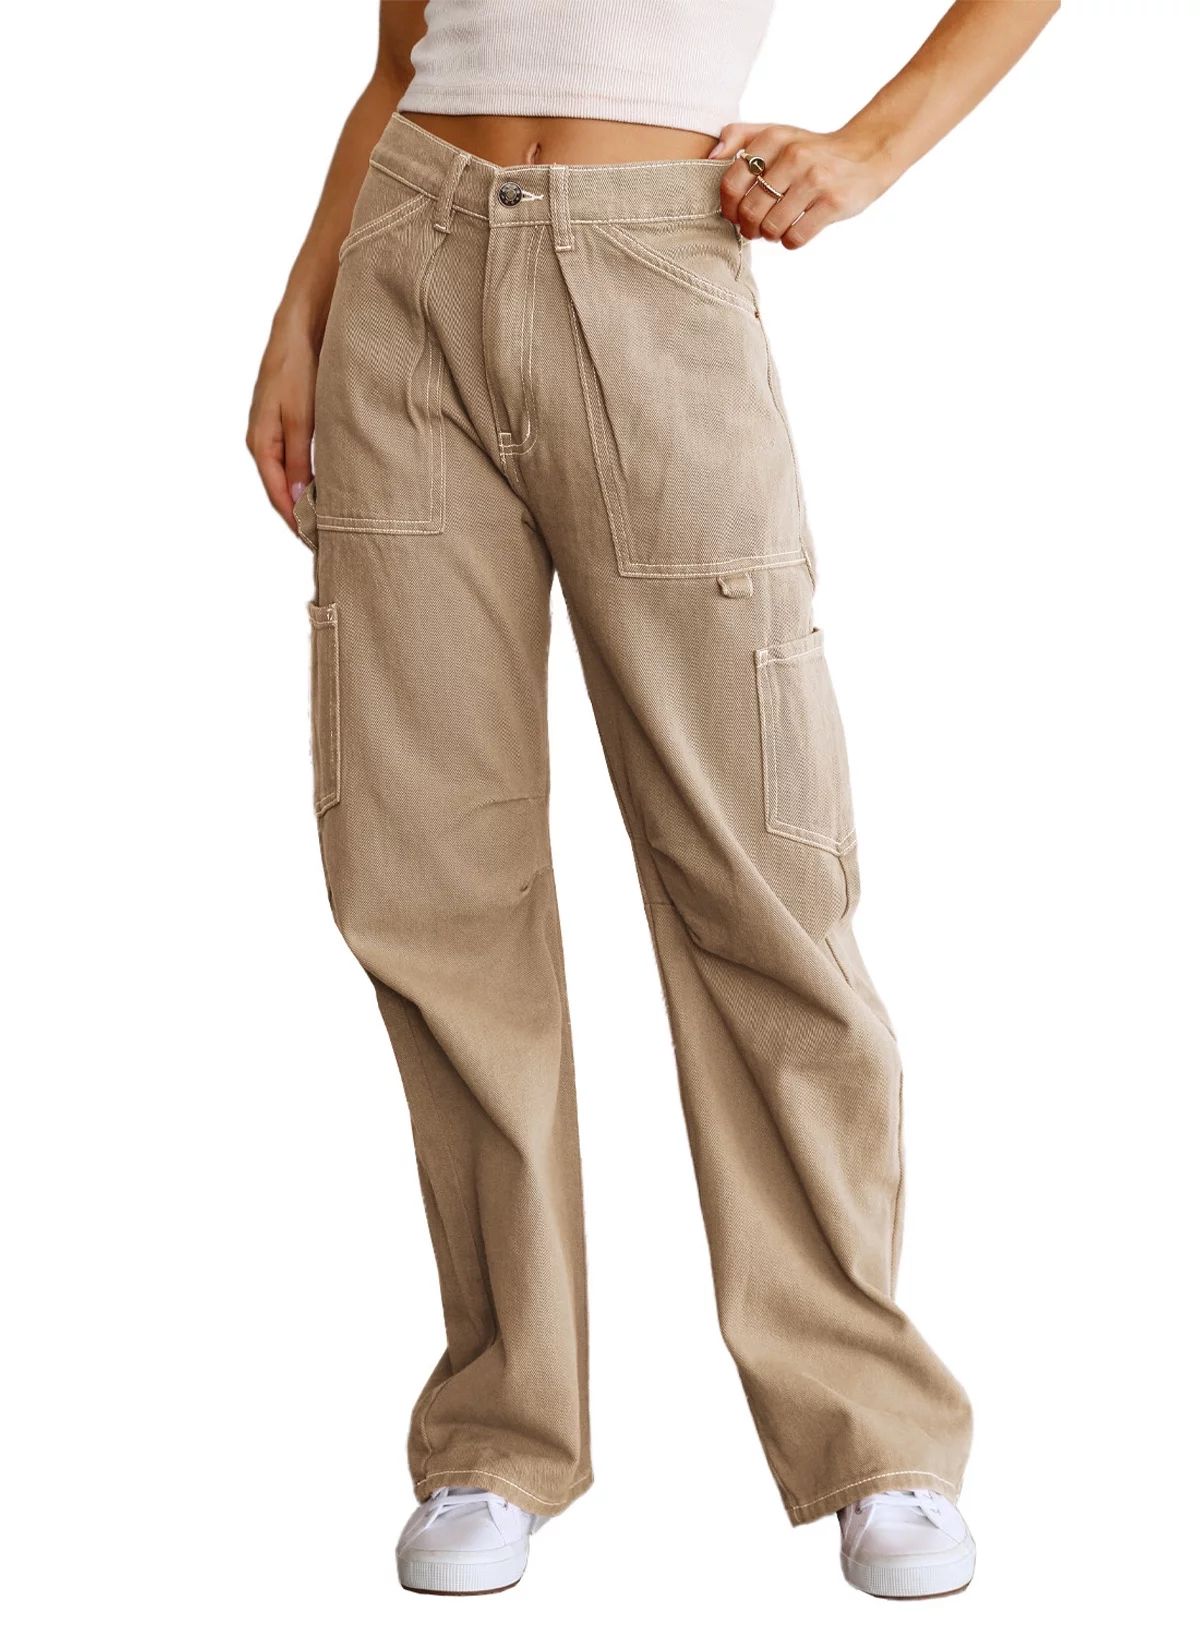 Chase Secret Women's High Waisted Cargo Pants Wide Leg Casual baggy Pants Trouser with Pockets 8 | Walmart (US)